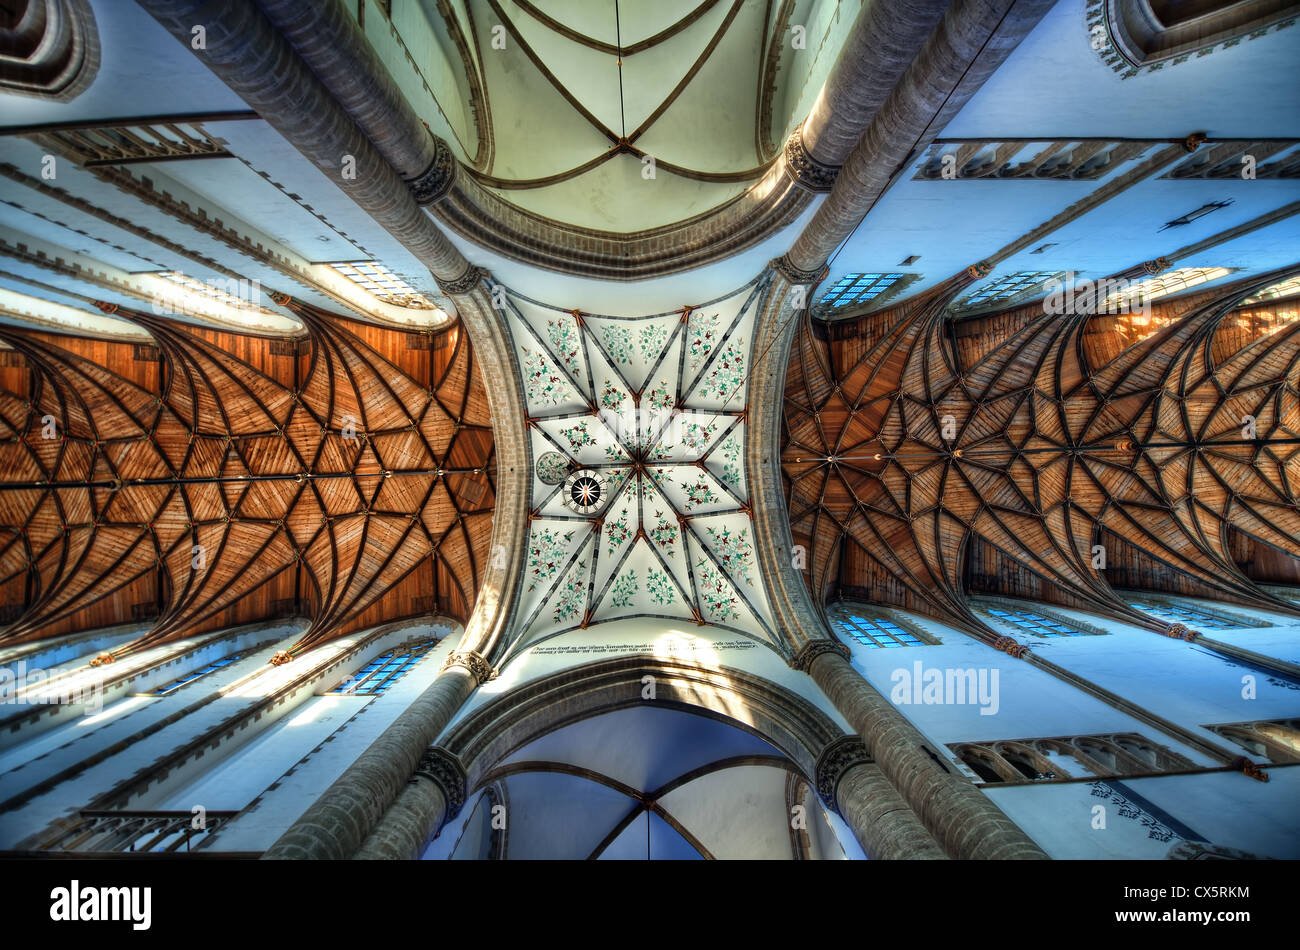 The ornate ceiling of the Gothic Cathedral of Saint Bavo in Haarlem, Netherlands. The cathedral is also known as the Grote Kerk. Stock Photo